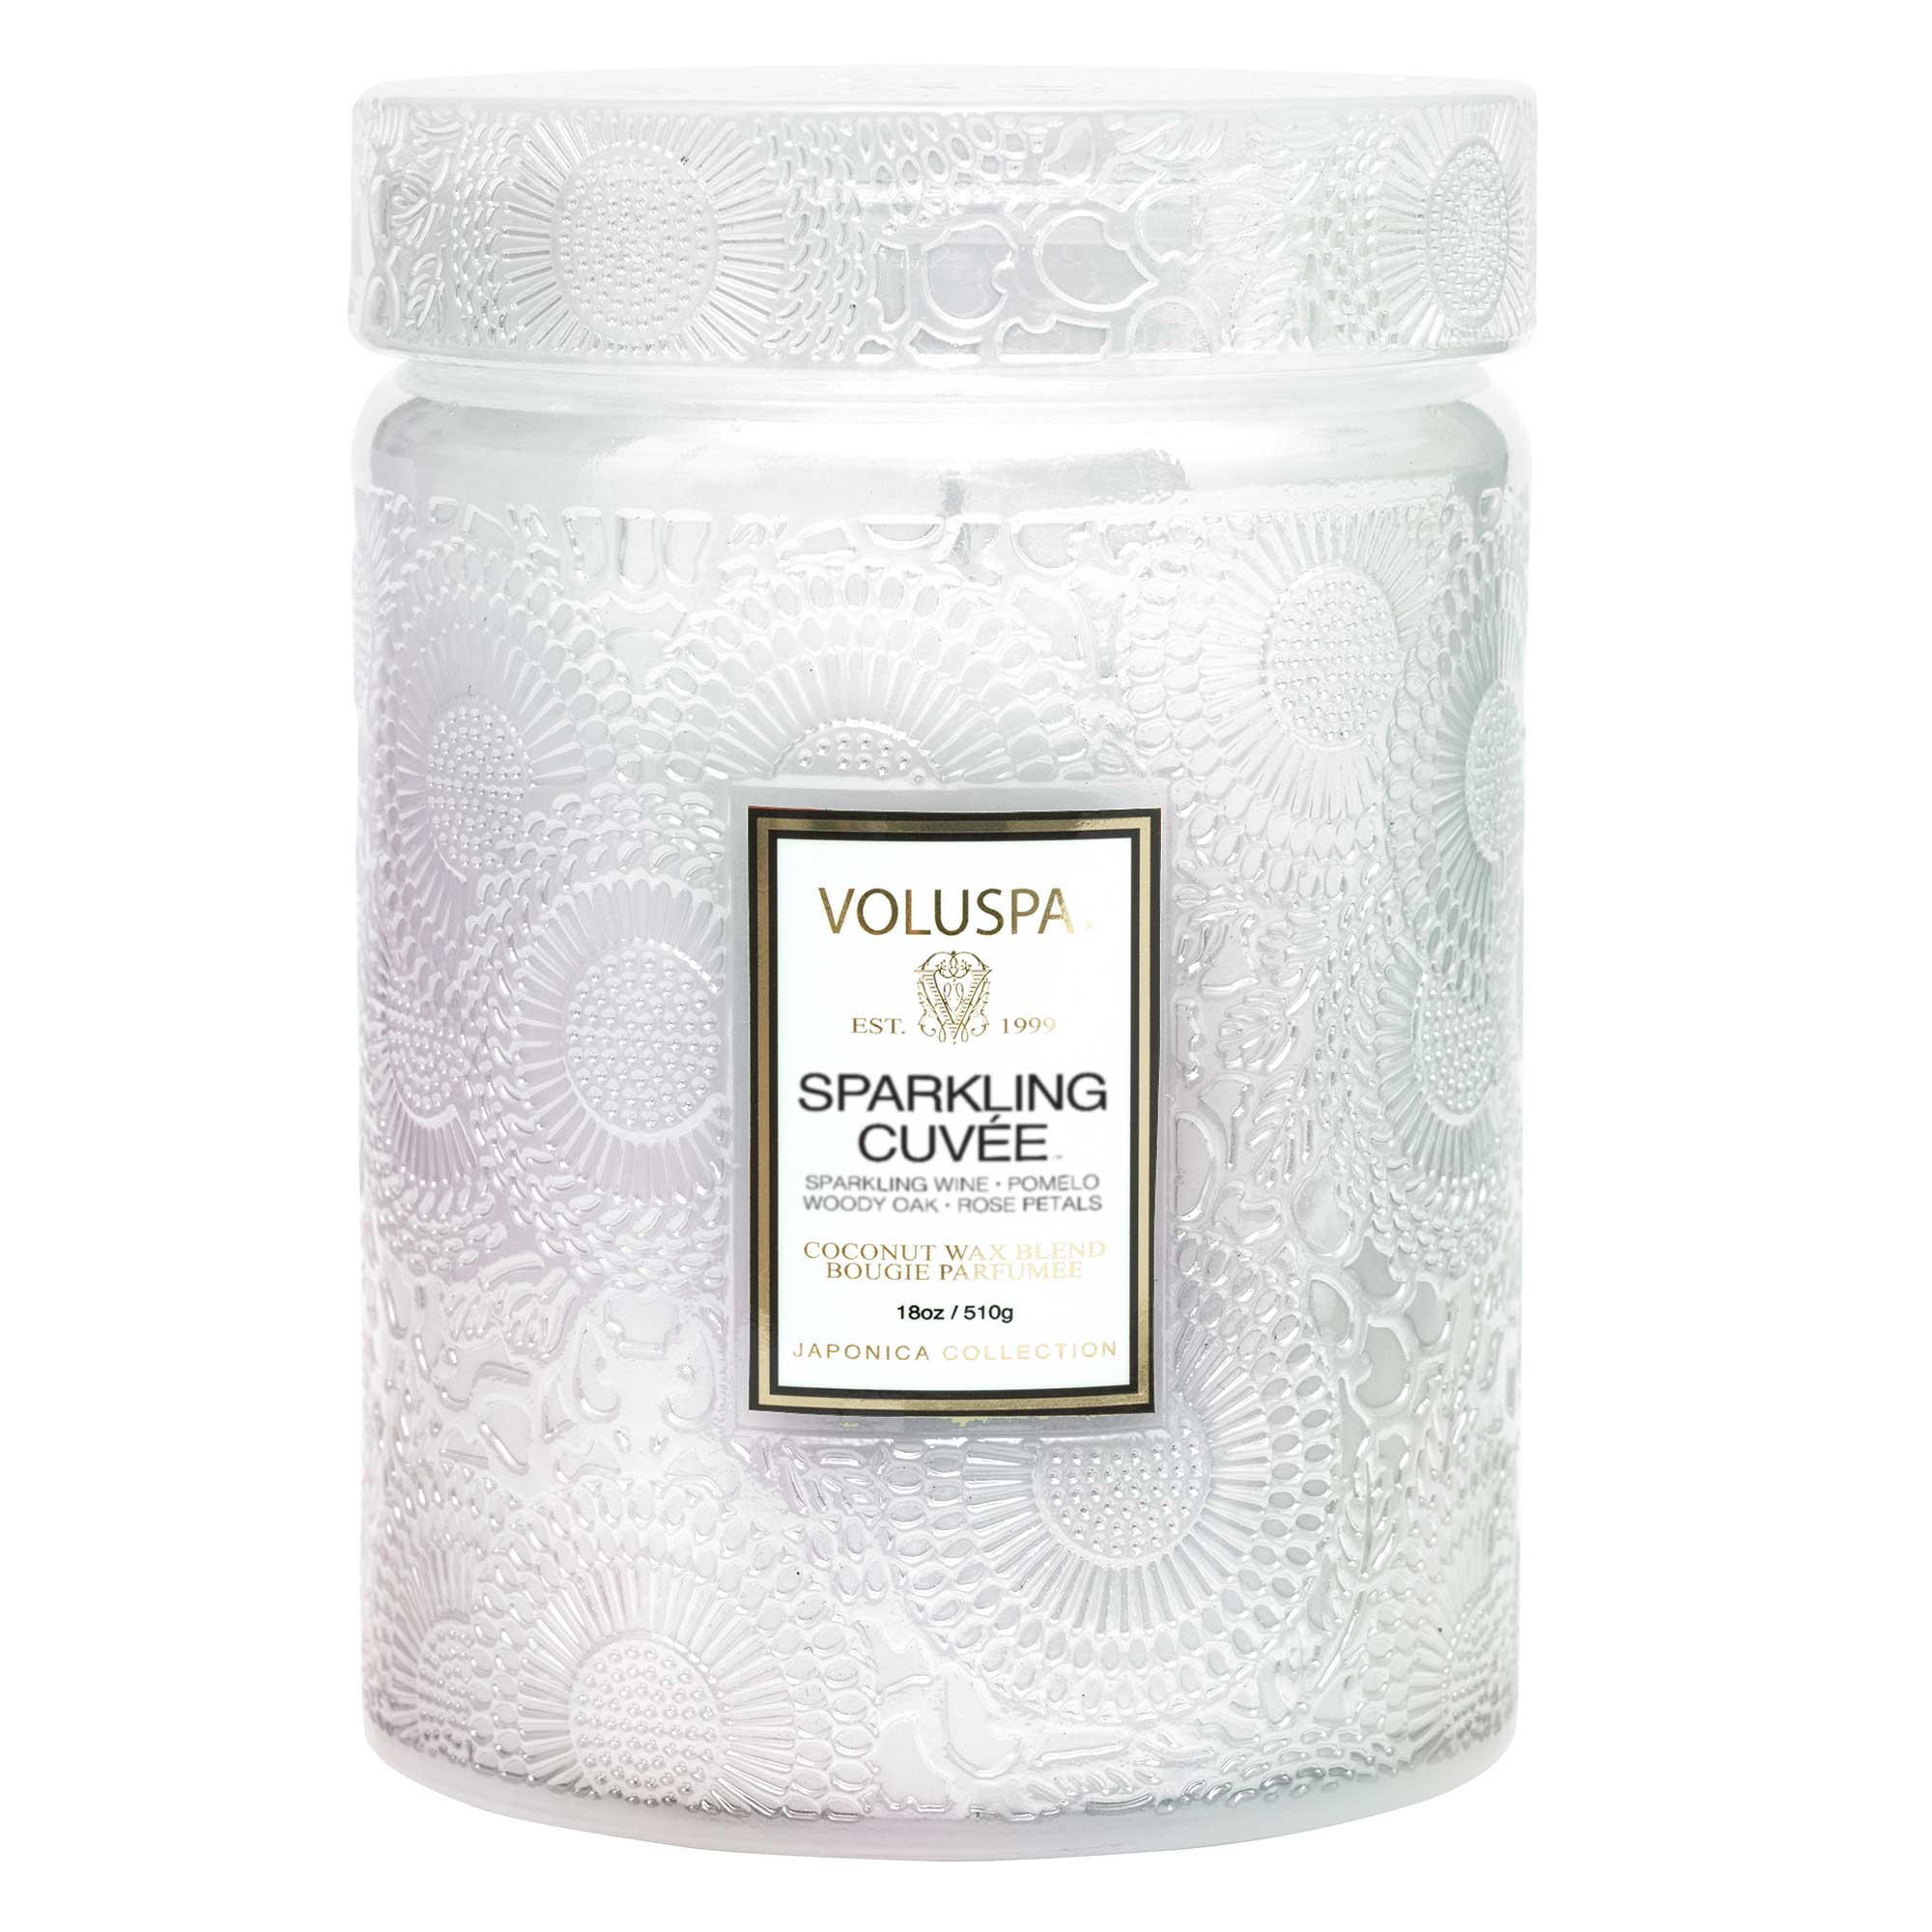 White iridescent candle glass jar with lid